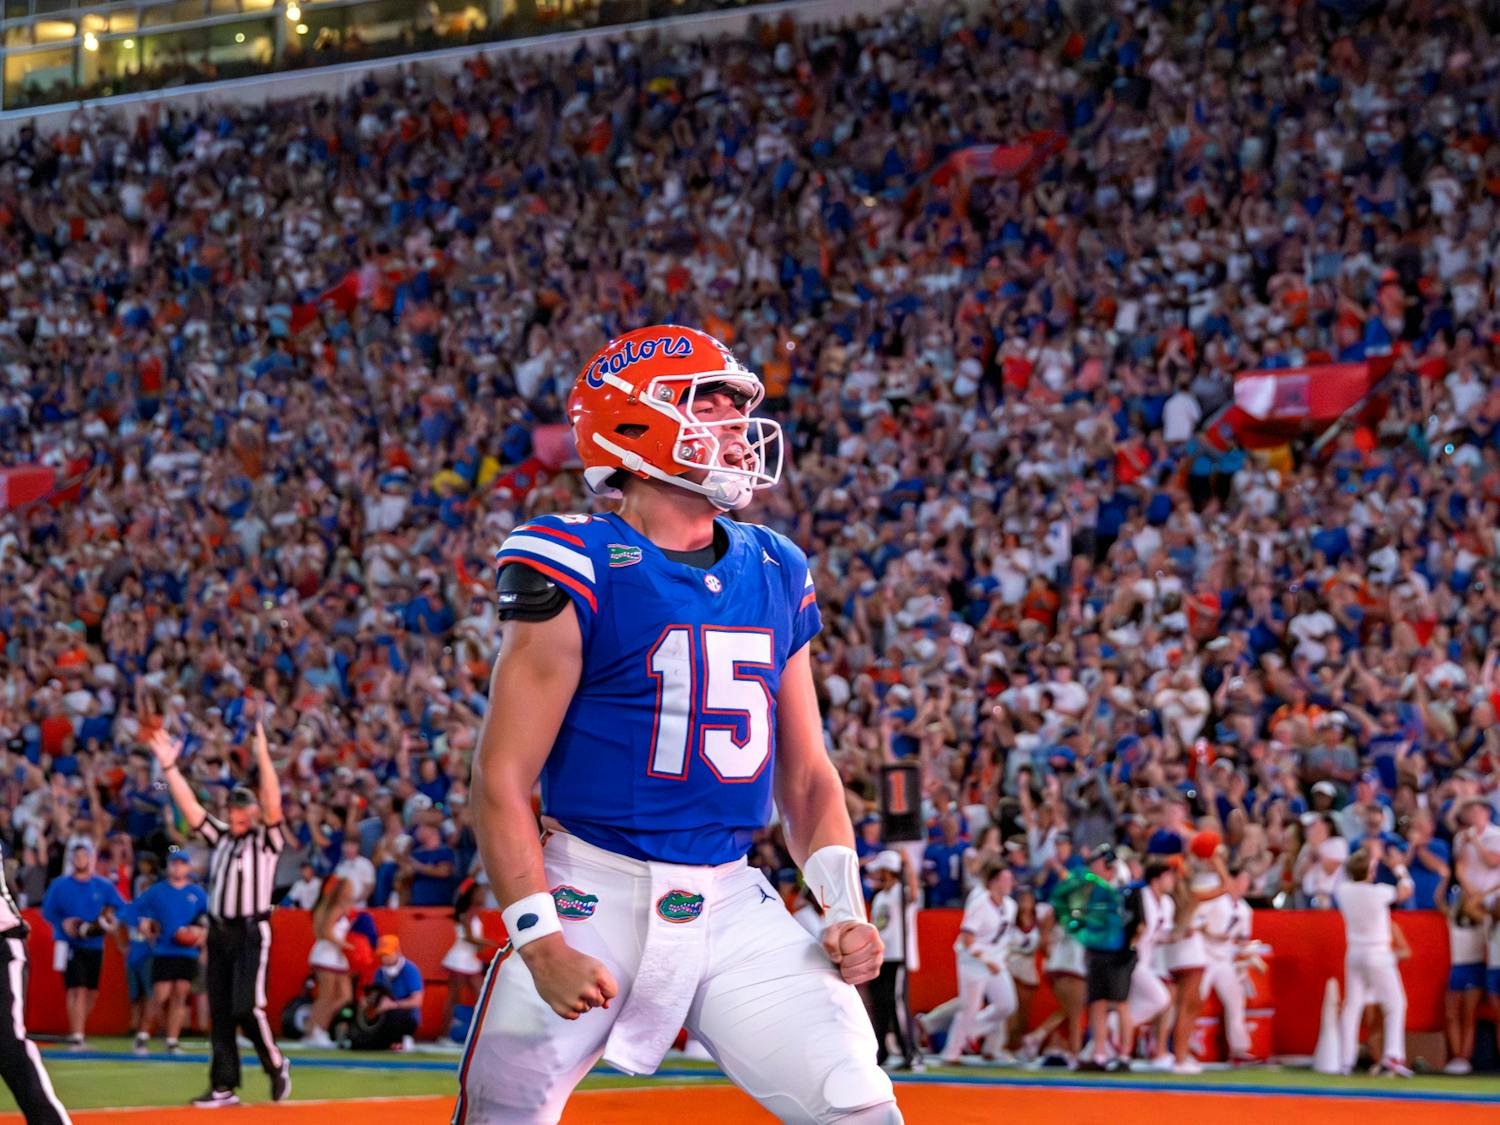 The Florida Gators defeated the McNeese State Cowboys in their first home game of the season in Ben Hill Griffin Stadium Saturday, Sept. 9, 2023.